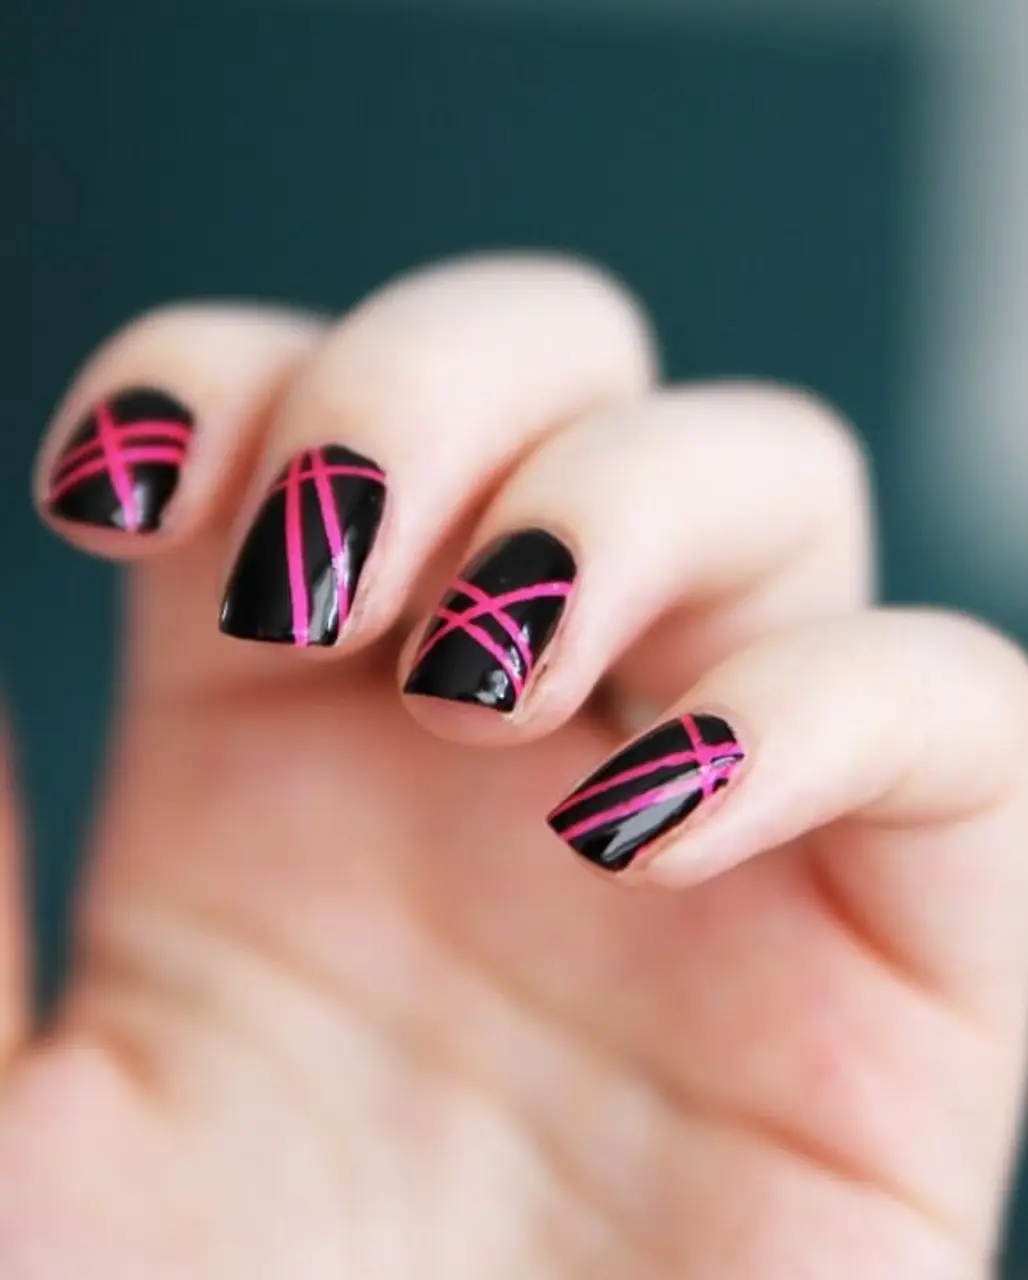 Hot Pink and Black